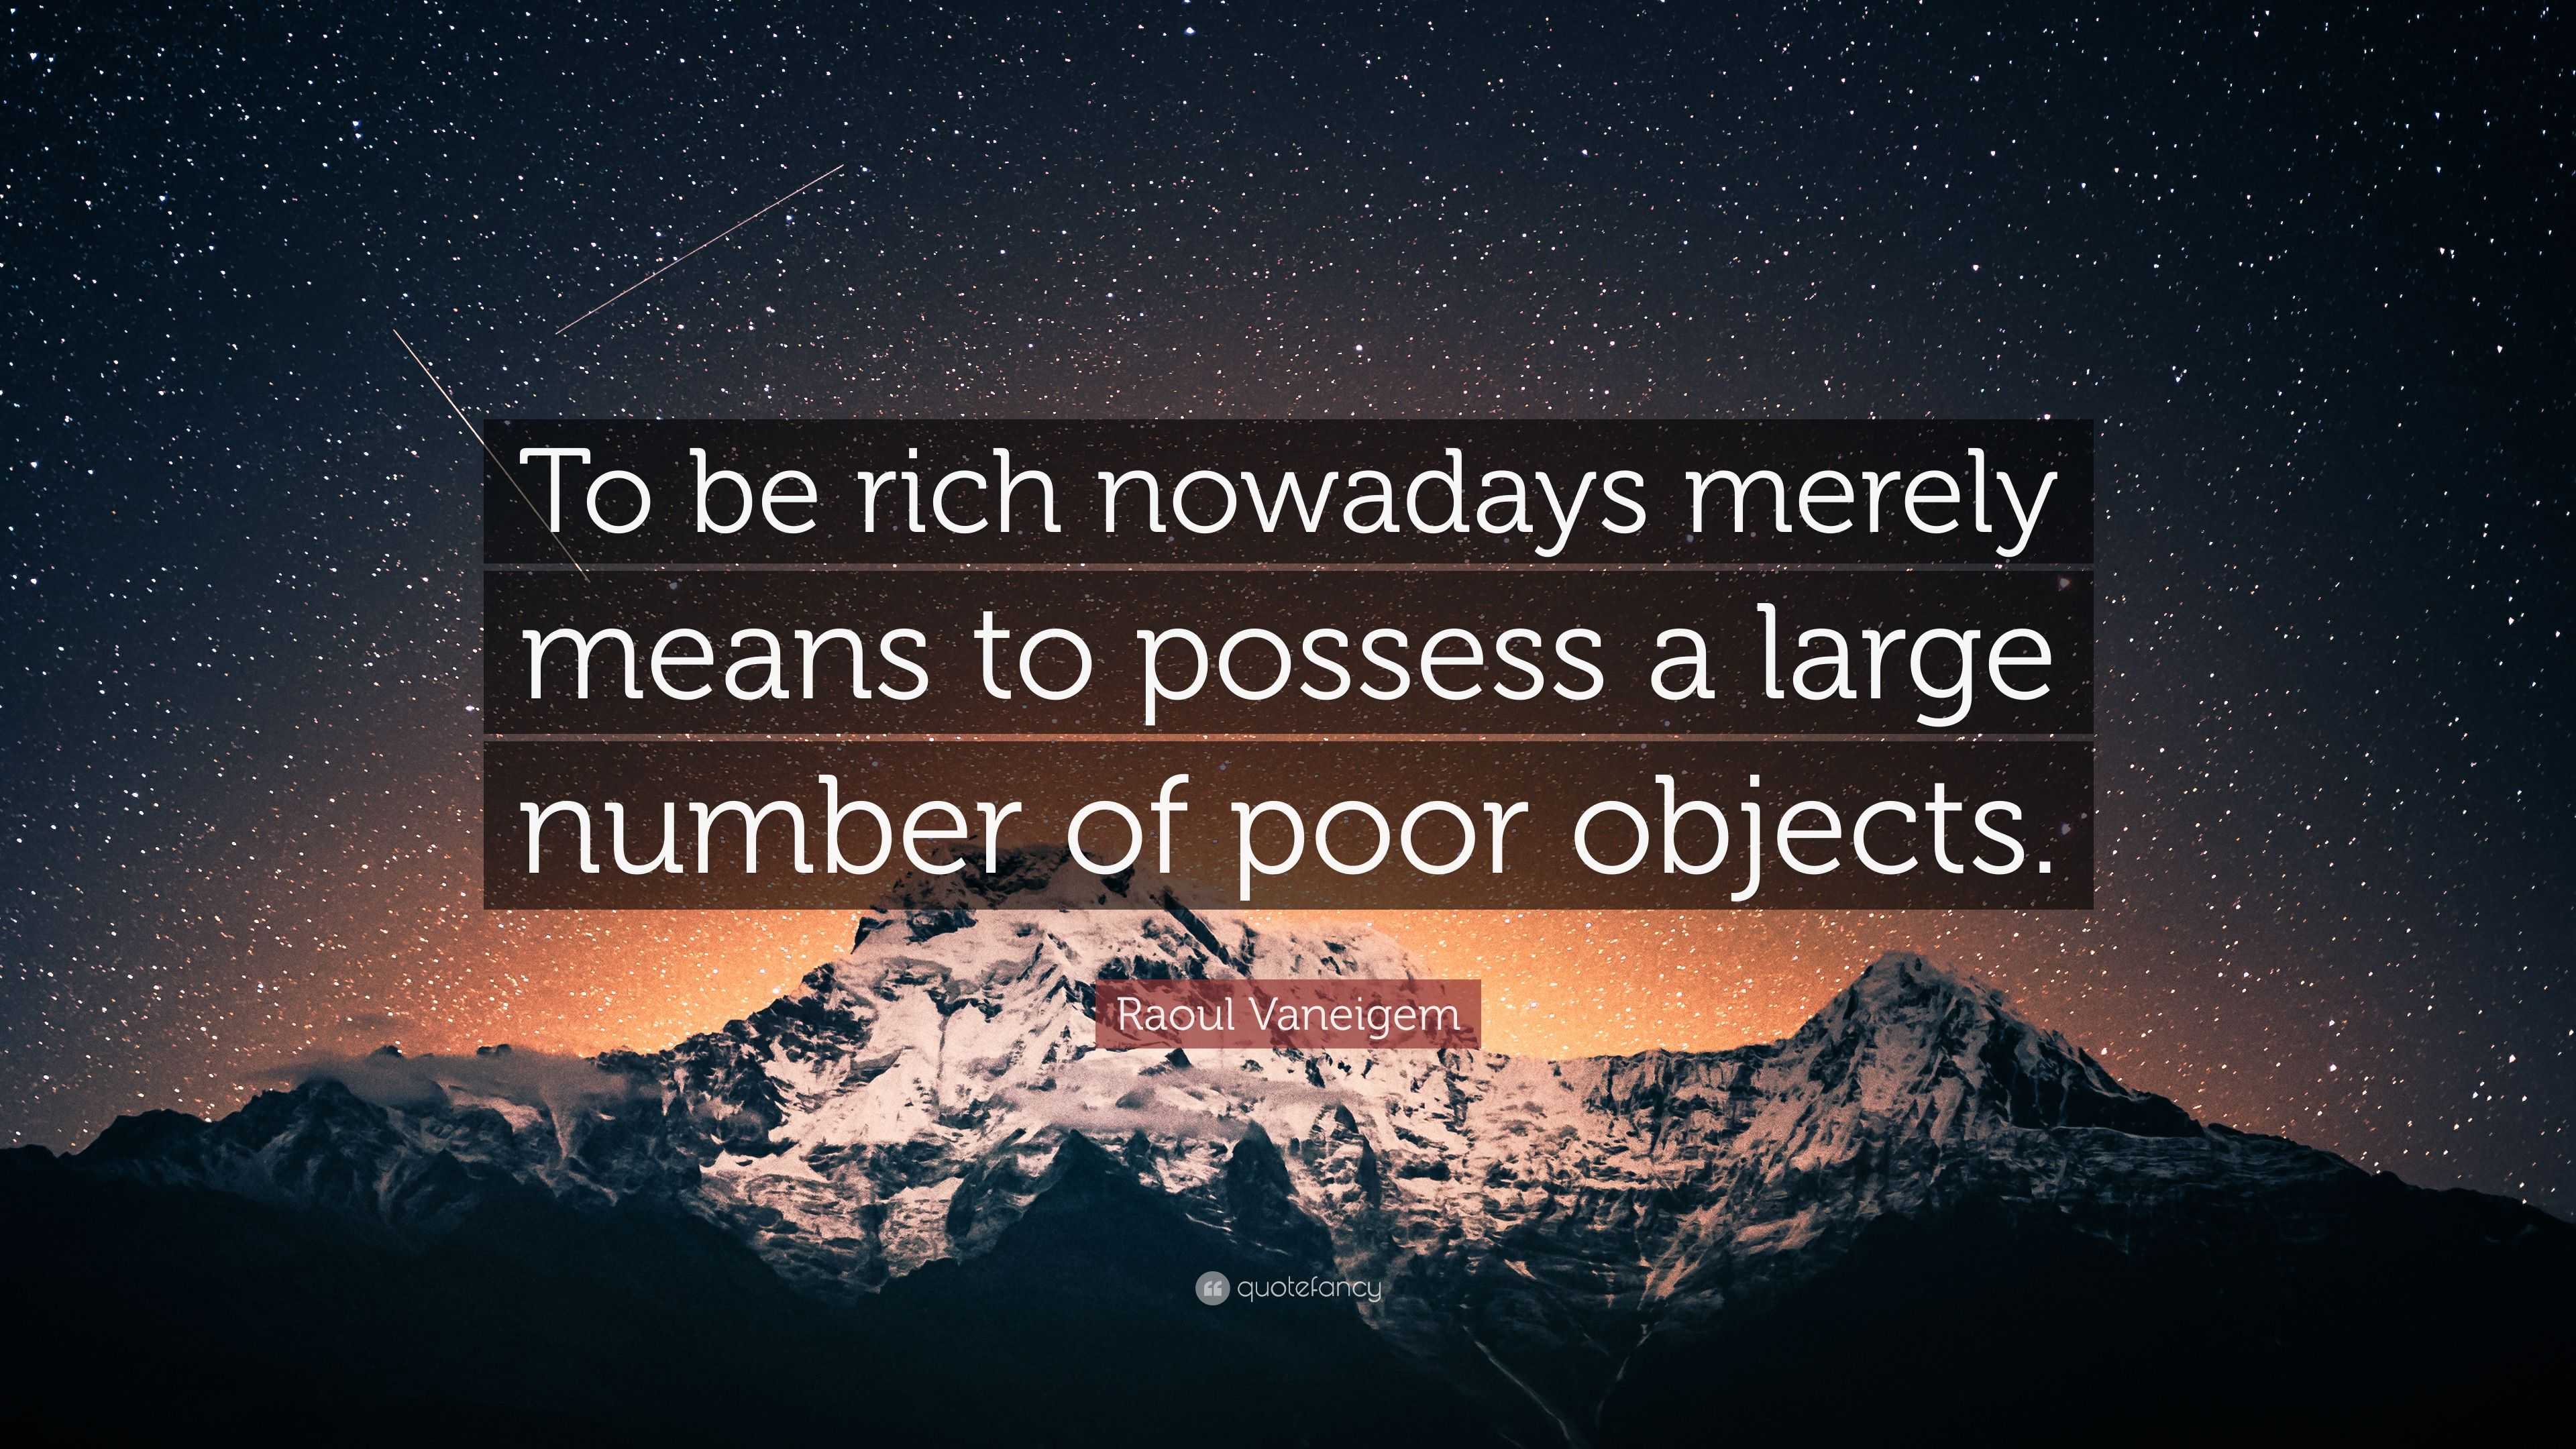 Raoul Vaneigem Quote: “To be rich nowadays merely means to possess a large  number of poor